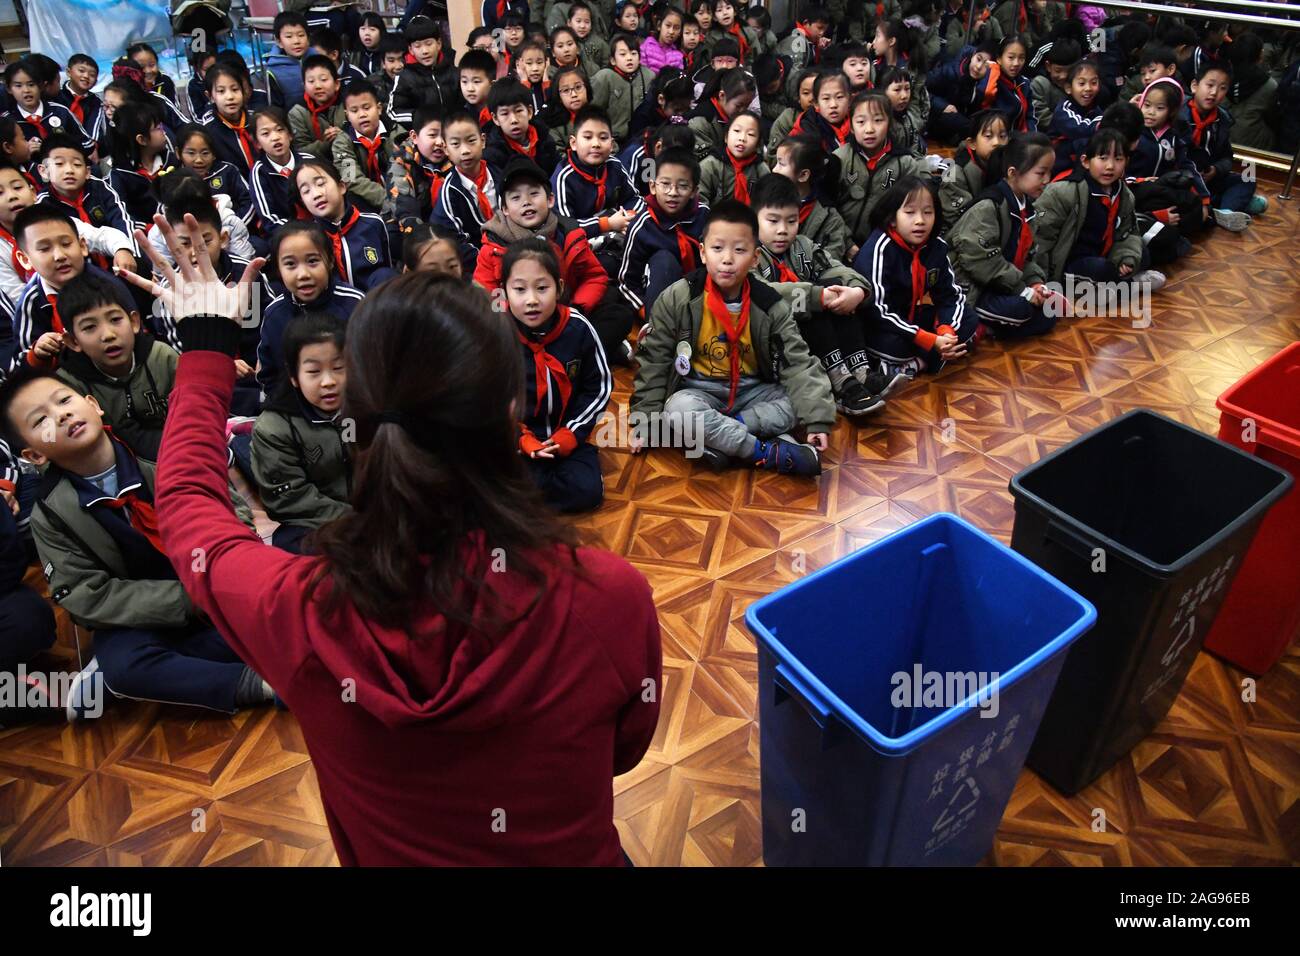 (191218) -- QINGDAO, Dec. 18, 2019 (Xinhua) -- A volunteer teaches pupils about garbage classification at the Juyuan Primary School in Qingdao City, east China's Shandong Province, Dec. 18, 2019. Youth volunteers for social service from the Qingdao Zhanqiao Bookstore launched a scientific information outreach program at the Juyuan Primary School Wednesday. Through video clips, knowledge contests, short dramas and amusing games, the volunteers attempted to help the pupils better understand the necessity of garbage classification as well as the importance of environmental and ecological protecti Stock Photo